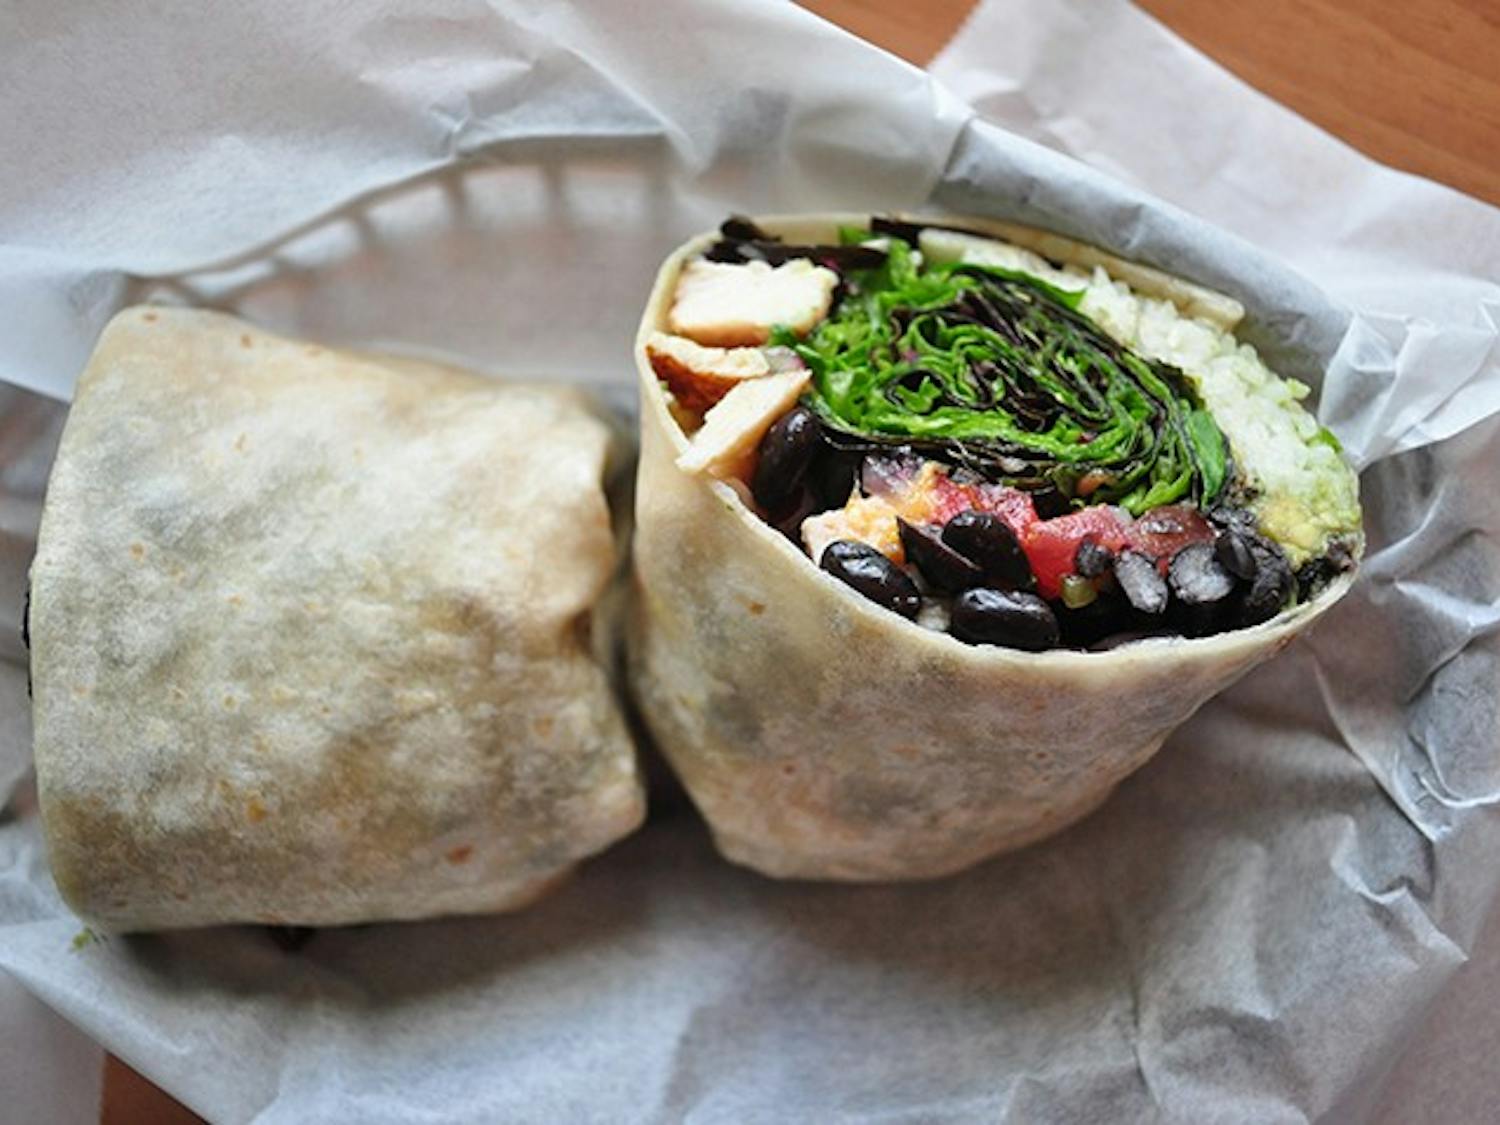 Beach BurritoIngredients: Roasted chicken breast, black beans, rice, sprouts, fresh guacamole, mango salsa and mixed greens